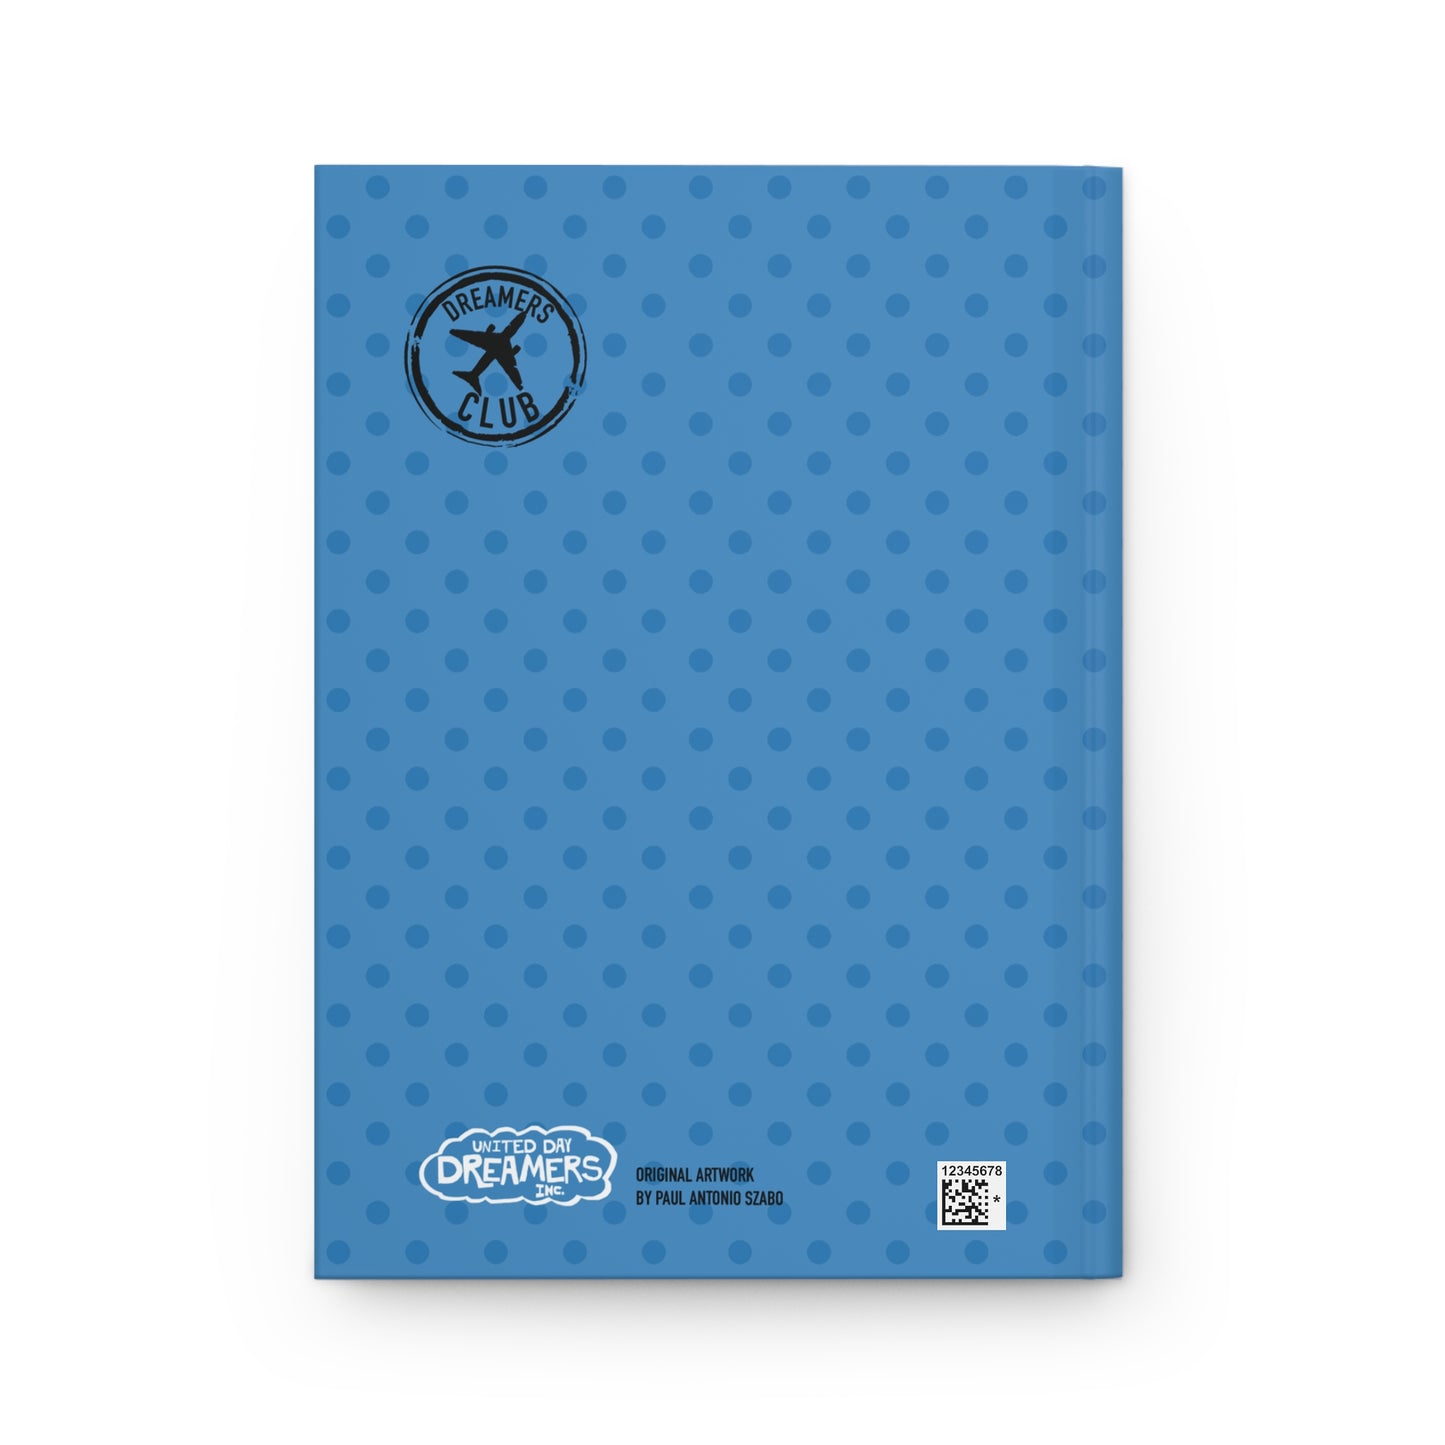 The Professional Day Dreamers Club Hardcover Blue Notebook